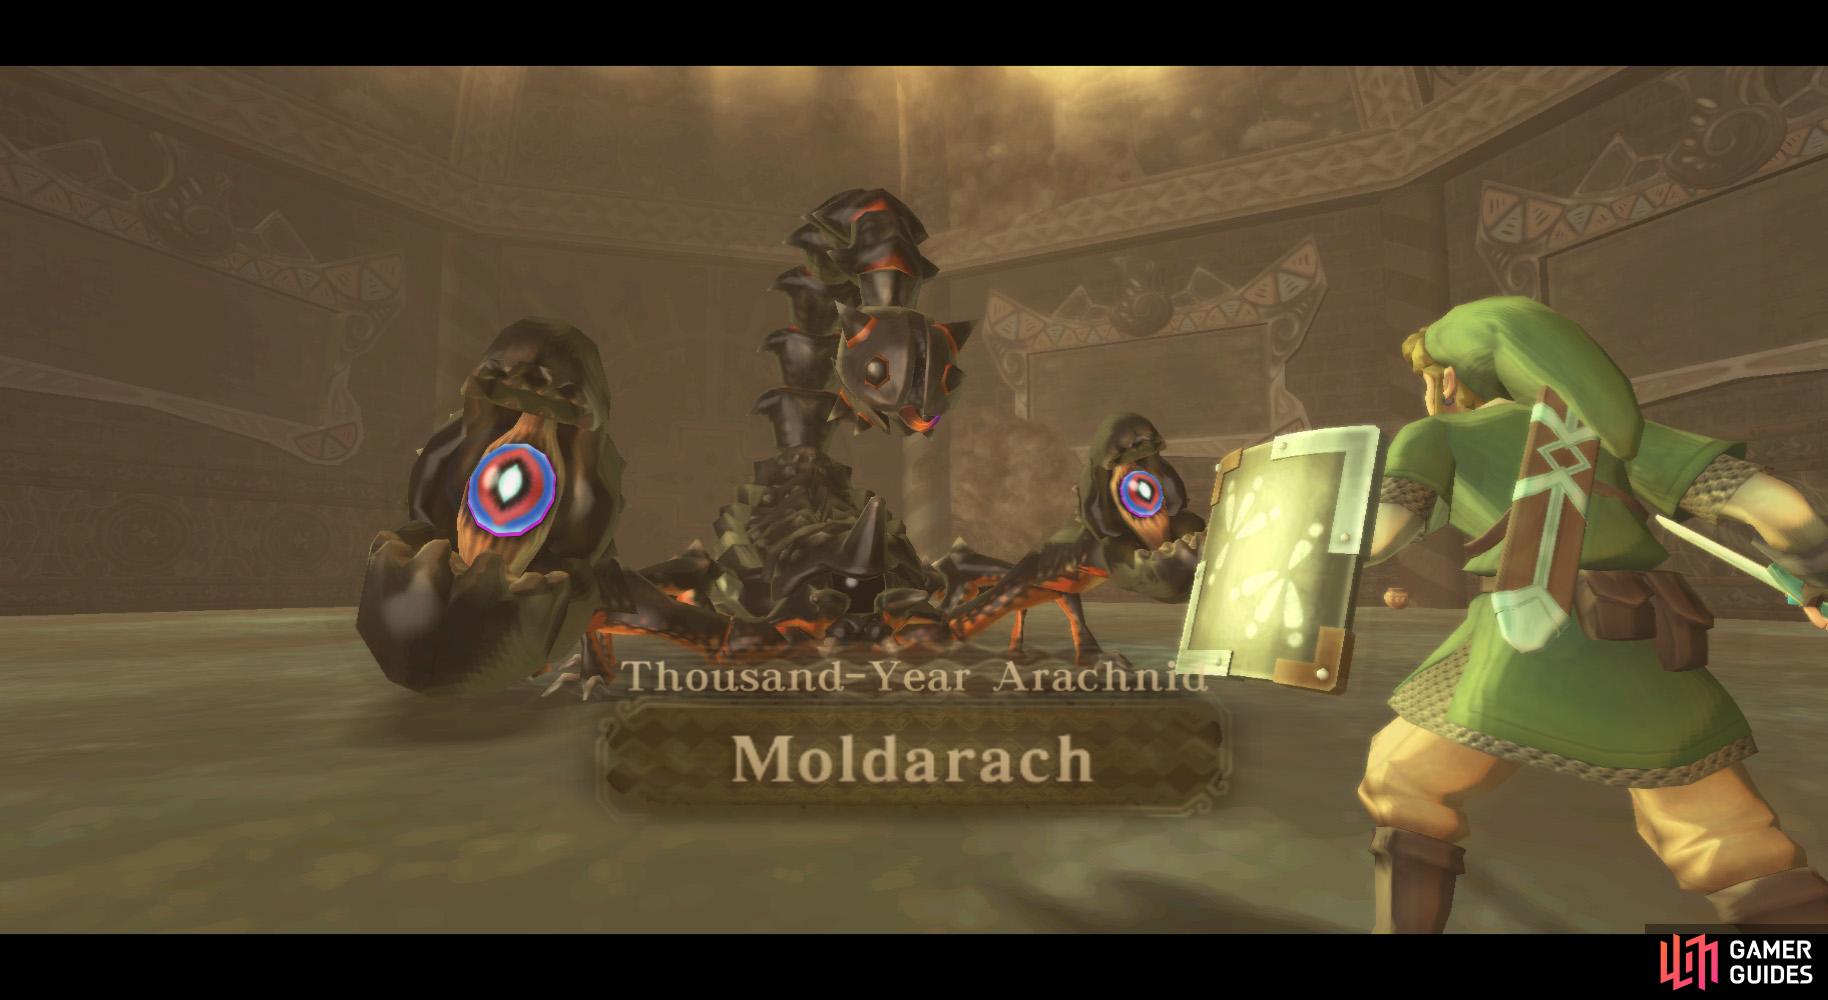 Moldarach looks menacing, but it's fairly easy if played right.